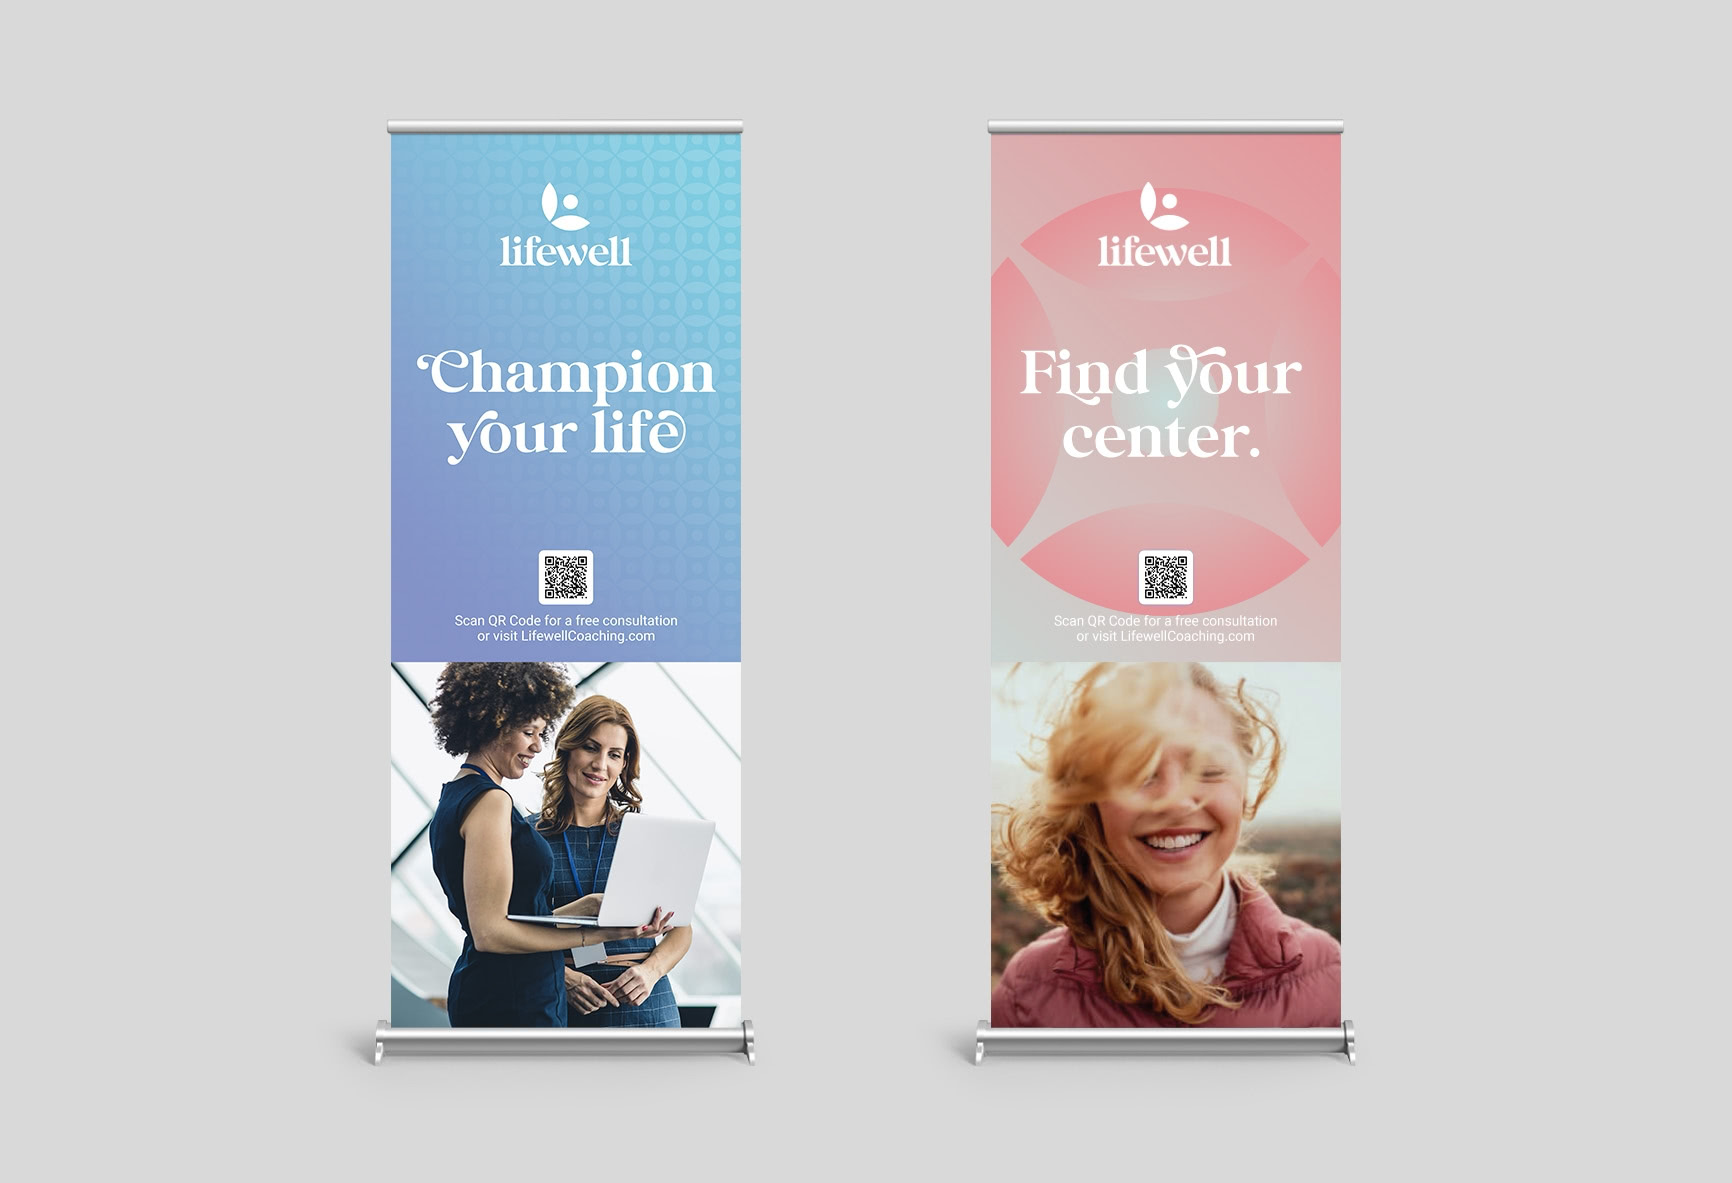 Lifewell promotional banners